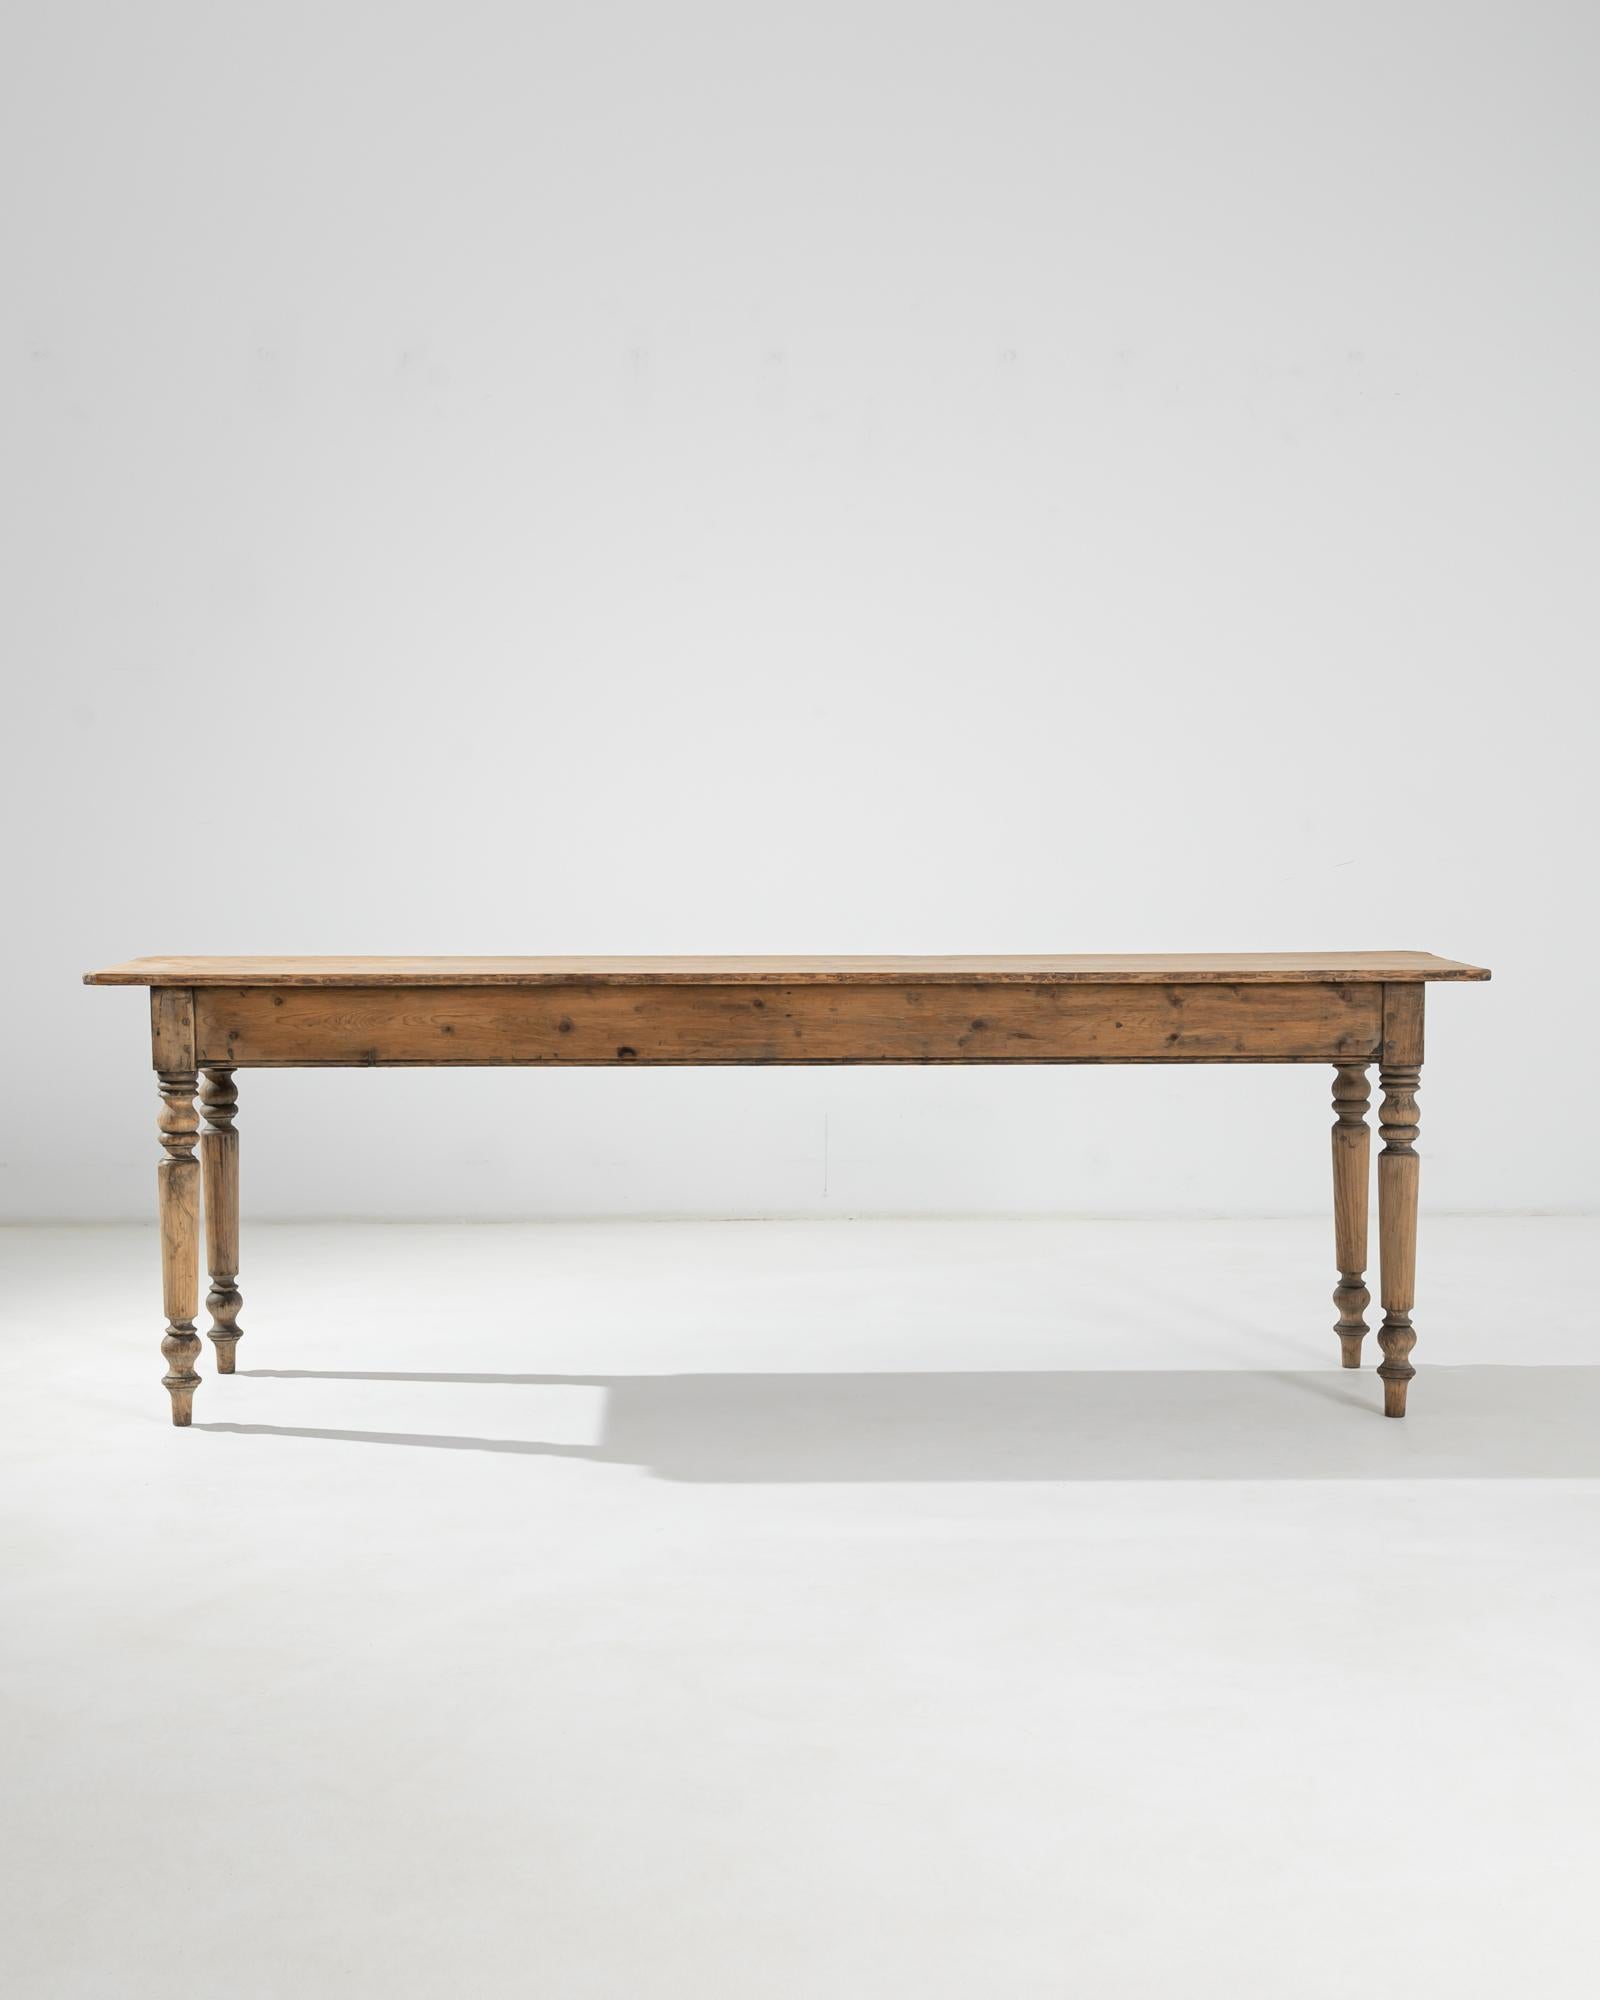 A wooden console table made in France circa 1900. Elevated on masterfully carved baluster legs, the long, narrow table top plays with the distorted sense of proportion, adding an extravagant counterpoint to the table’s rustic allure.